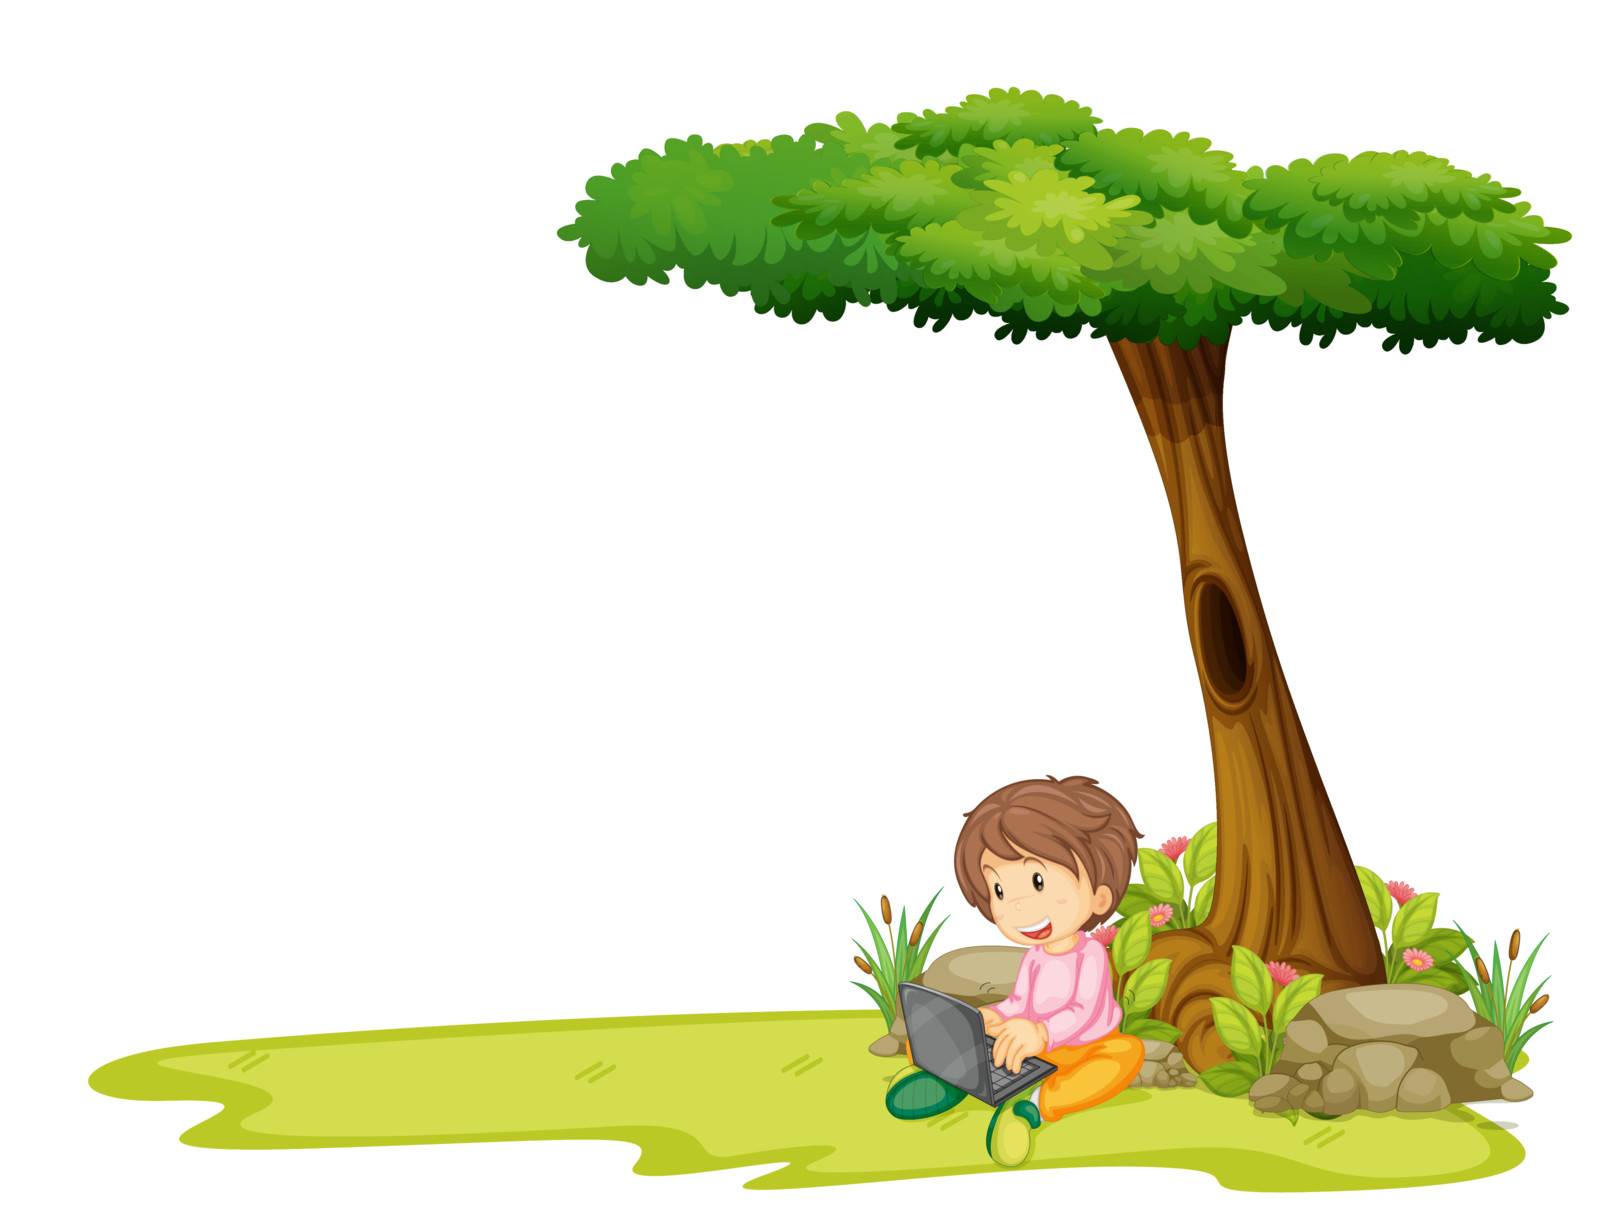 Illustration of a boy with a laptop under a tree on a white background